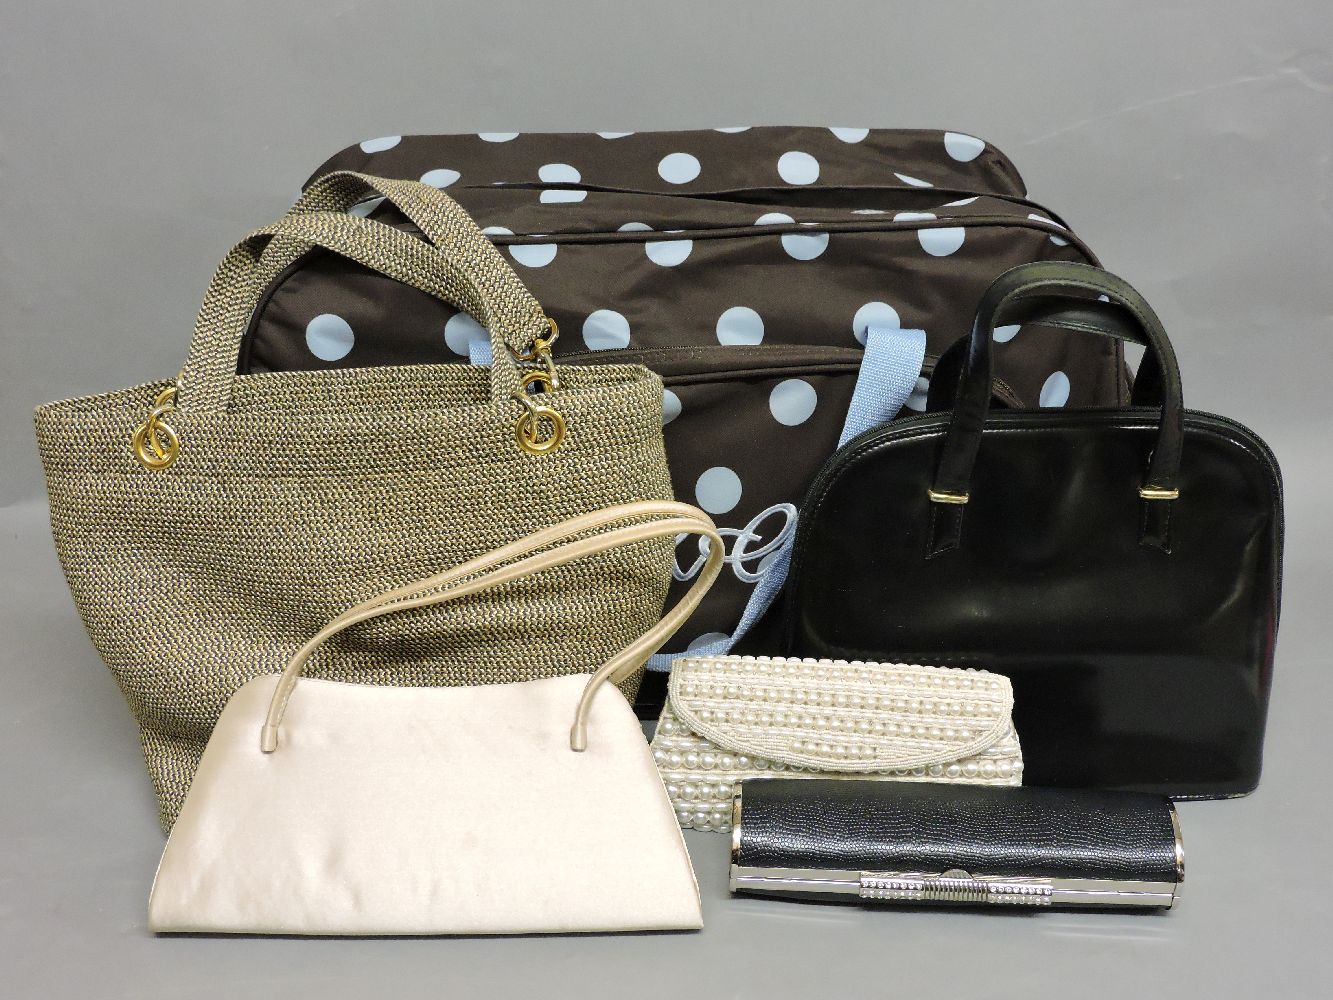 A brown and blue spotted travel bag, and four evening handbags, including a black lizard skin